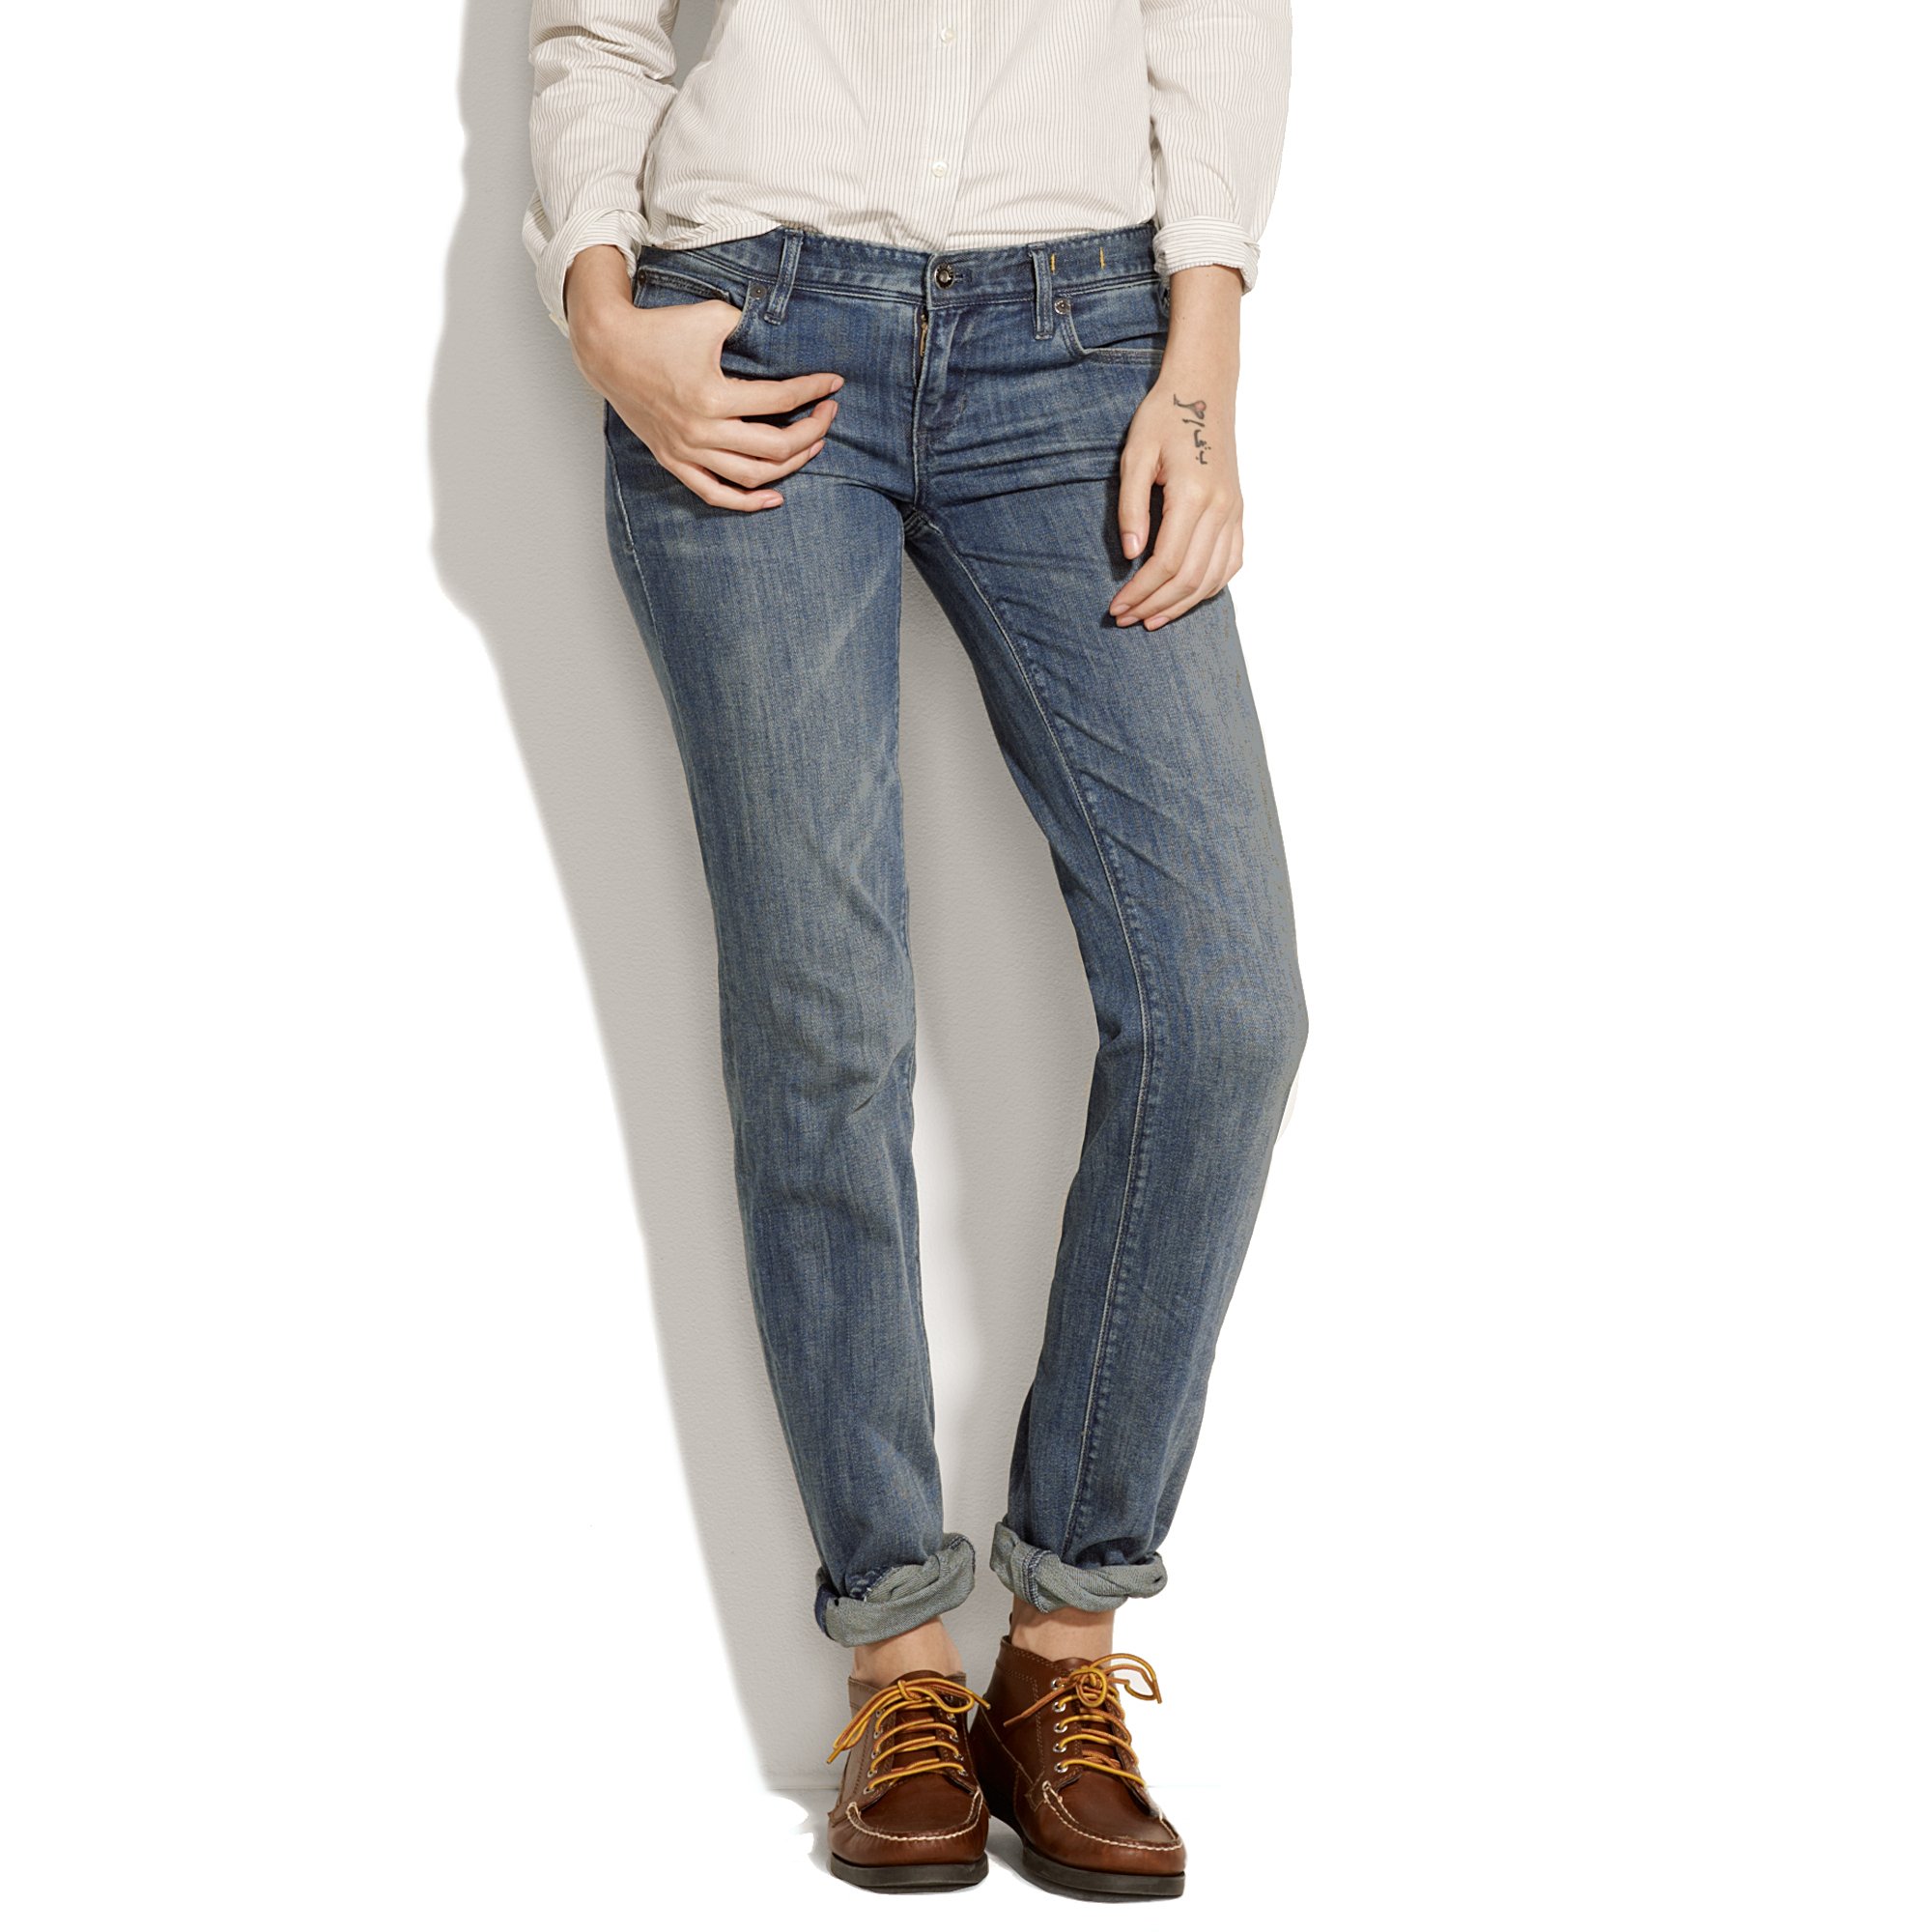 Madewell Rail Straight Jeans in Eastern Wash in Blue - Lyst